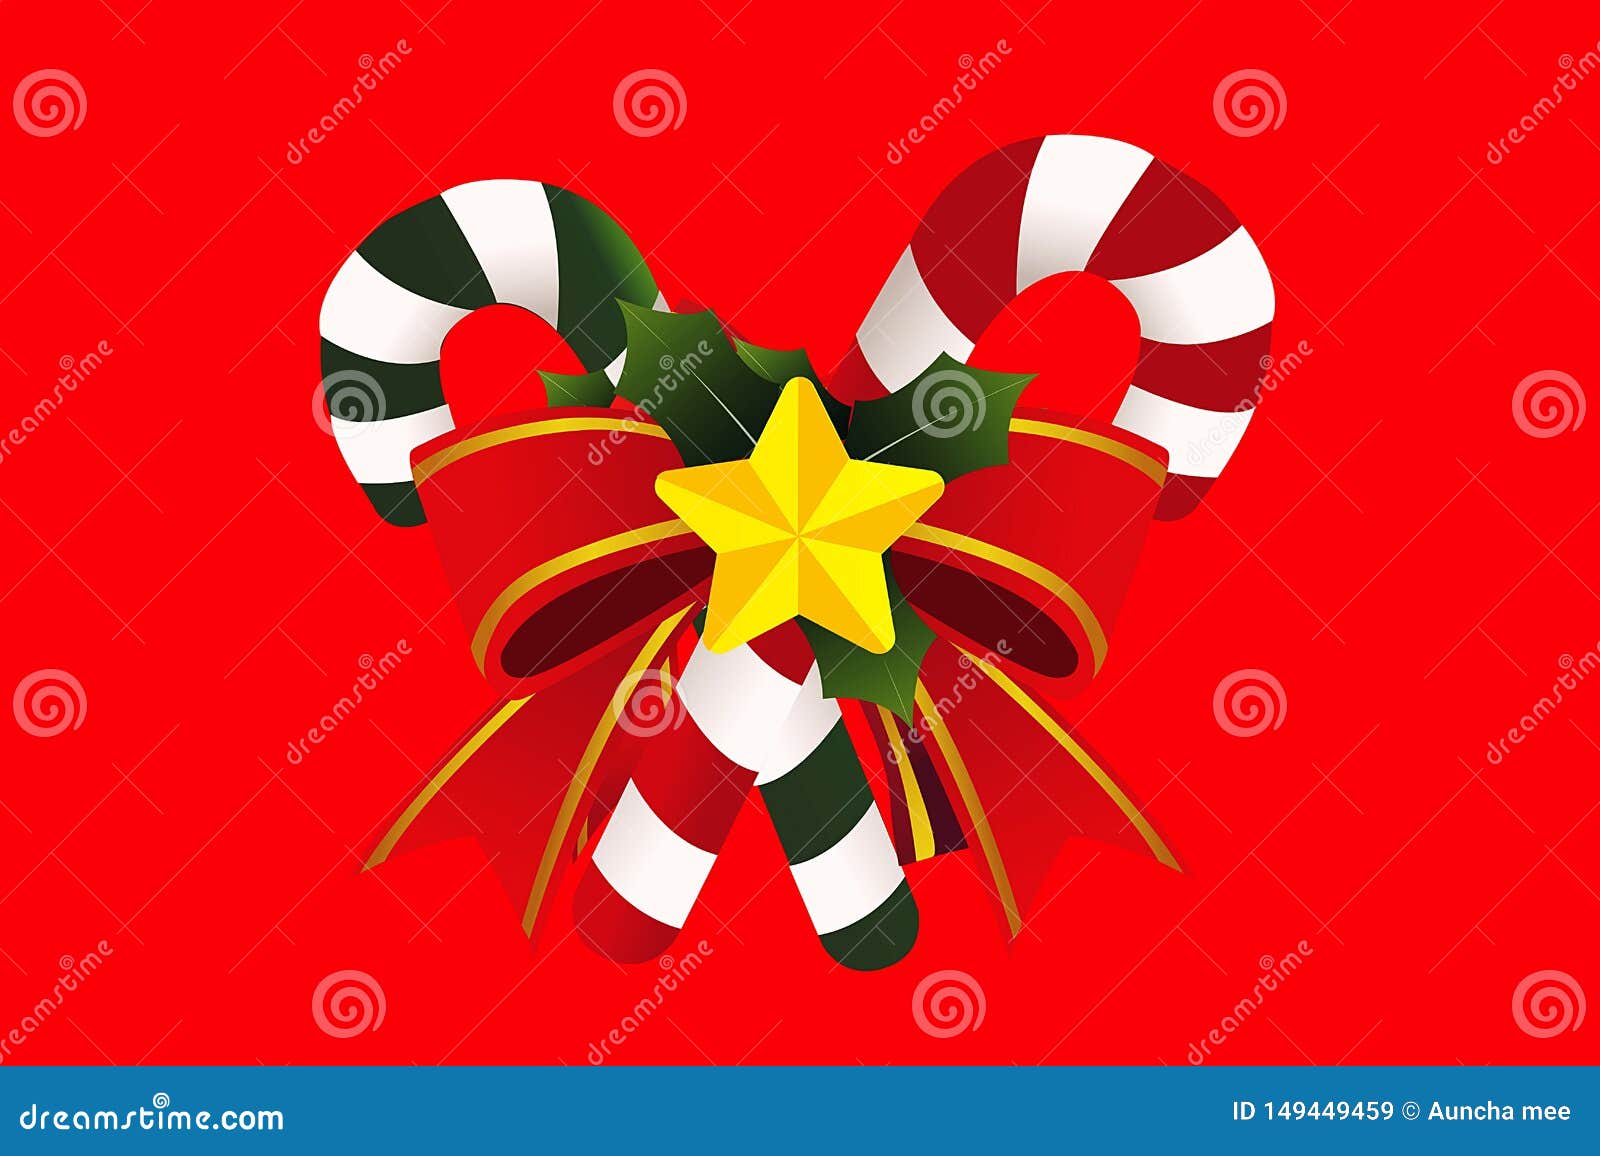 Christmas Candy Cane With Bow Illustration Isolation On Red Background Stock Illustration Illustration Of Snack Berries 149449459